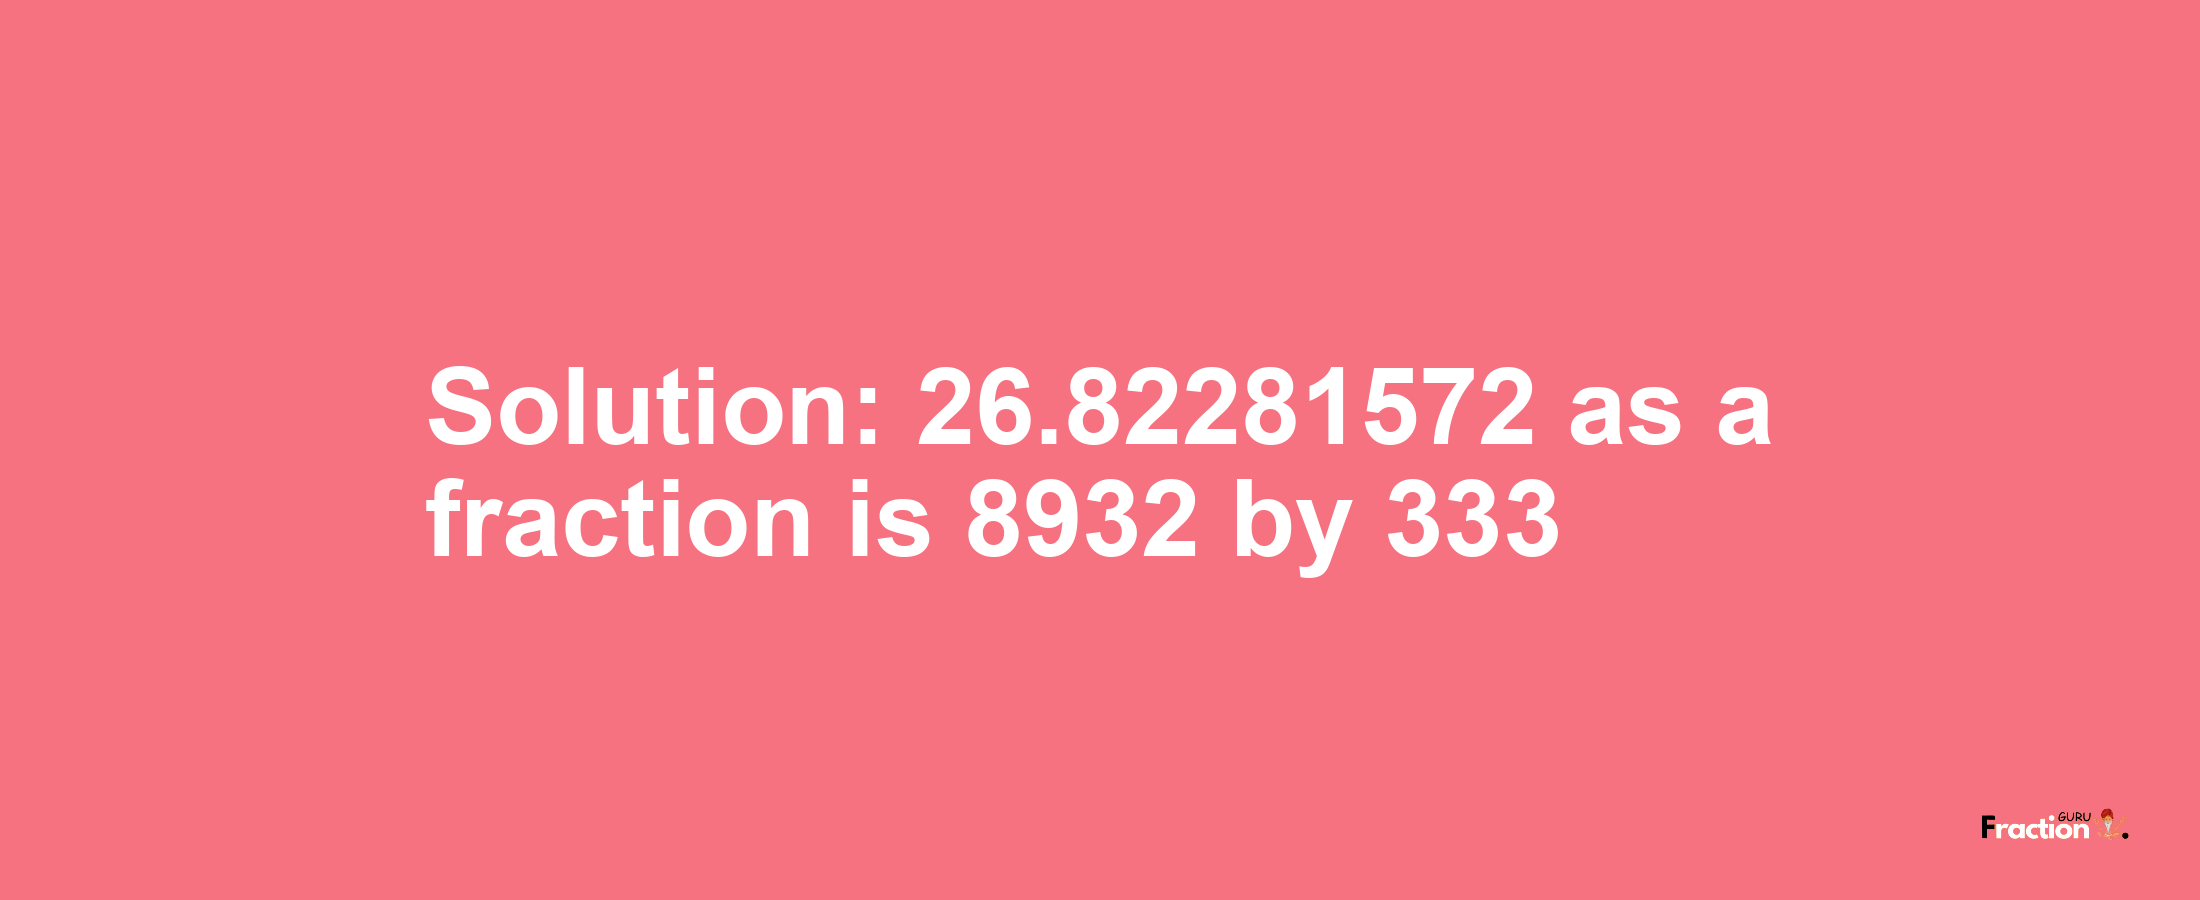 Solution:26.82281572 as a fraction is 8932/333